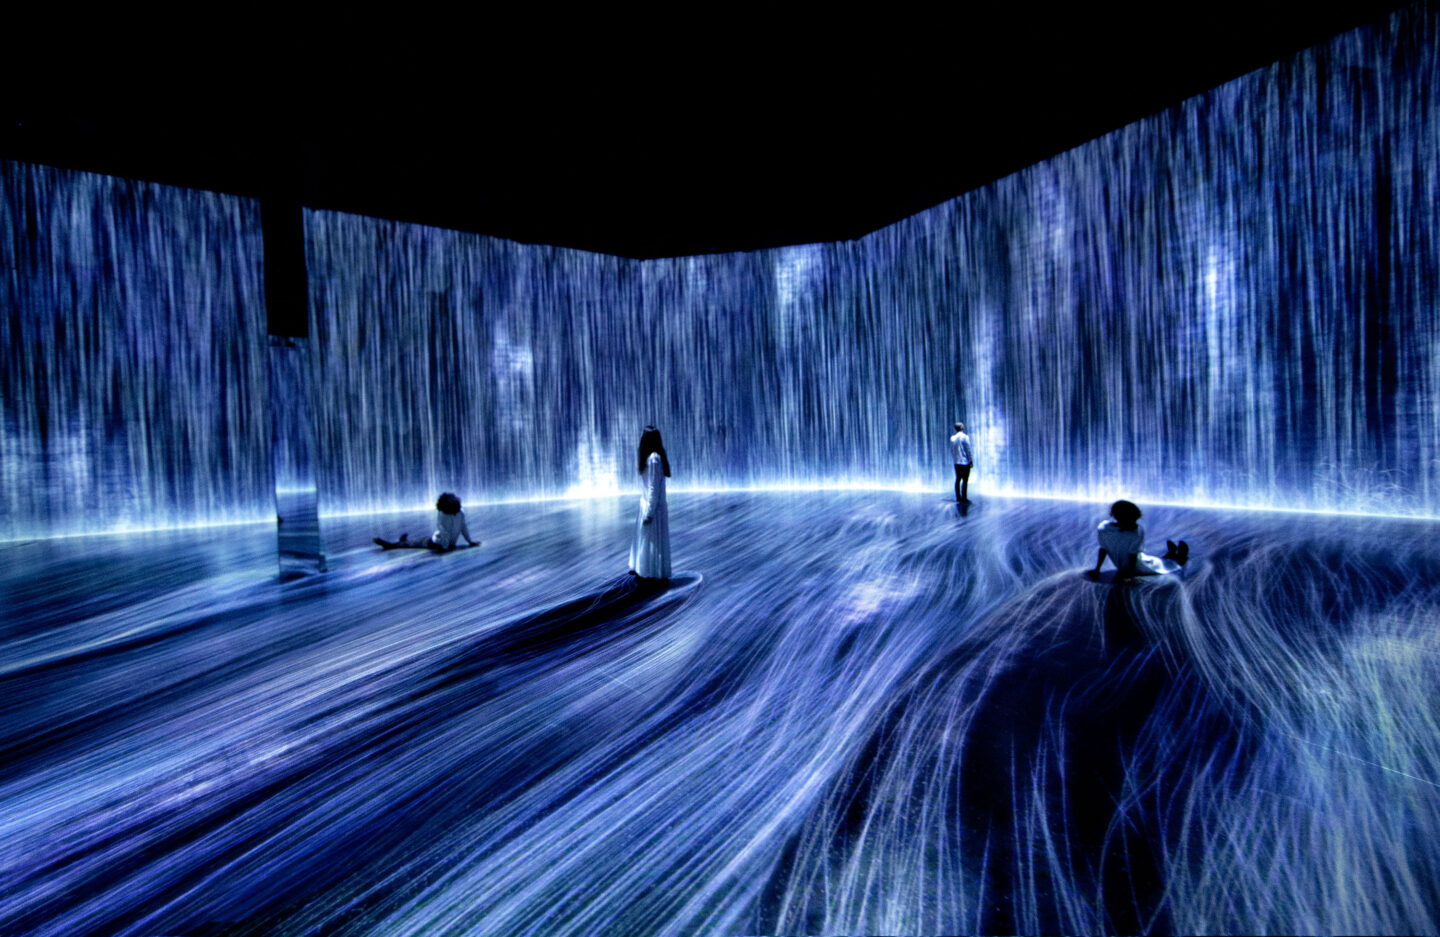 The Wick - teamLab, Universe of Water Particles, Transcending Boundaries, 2017. Sound: Hideaki Takahashi.Installation view of Every Wall is a Door, Superblue Miami, 2021. Sound: Hideaki Takahashi. teamLab, Courtesy of Pace Gallery